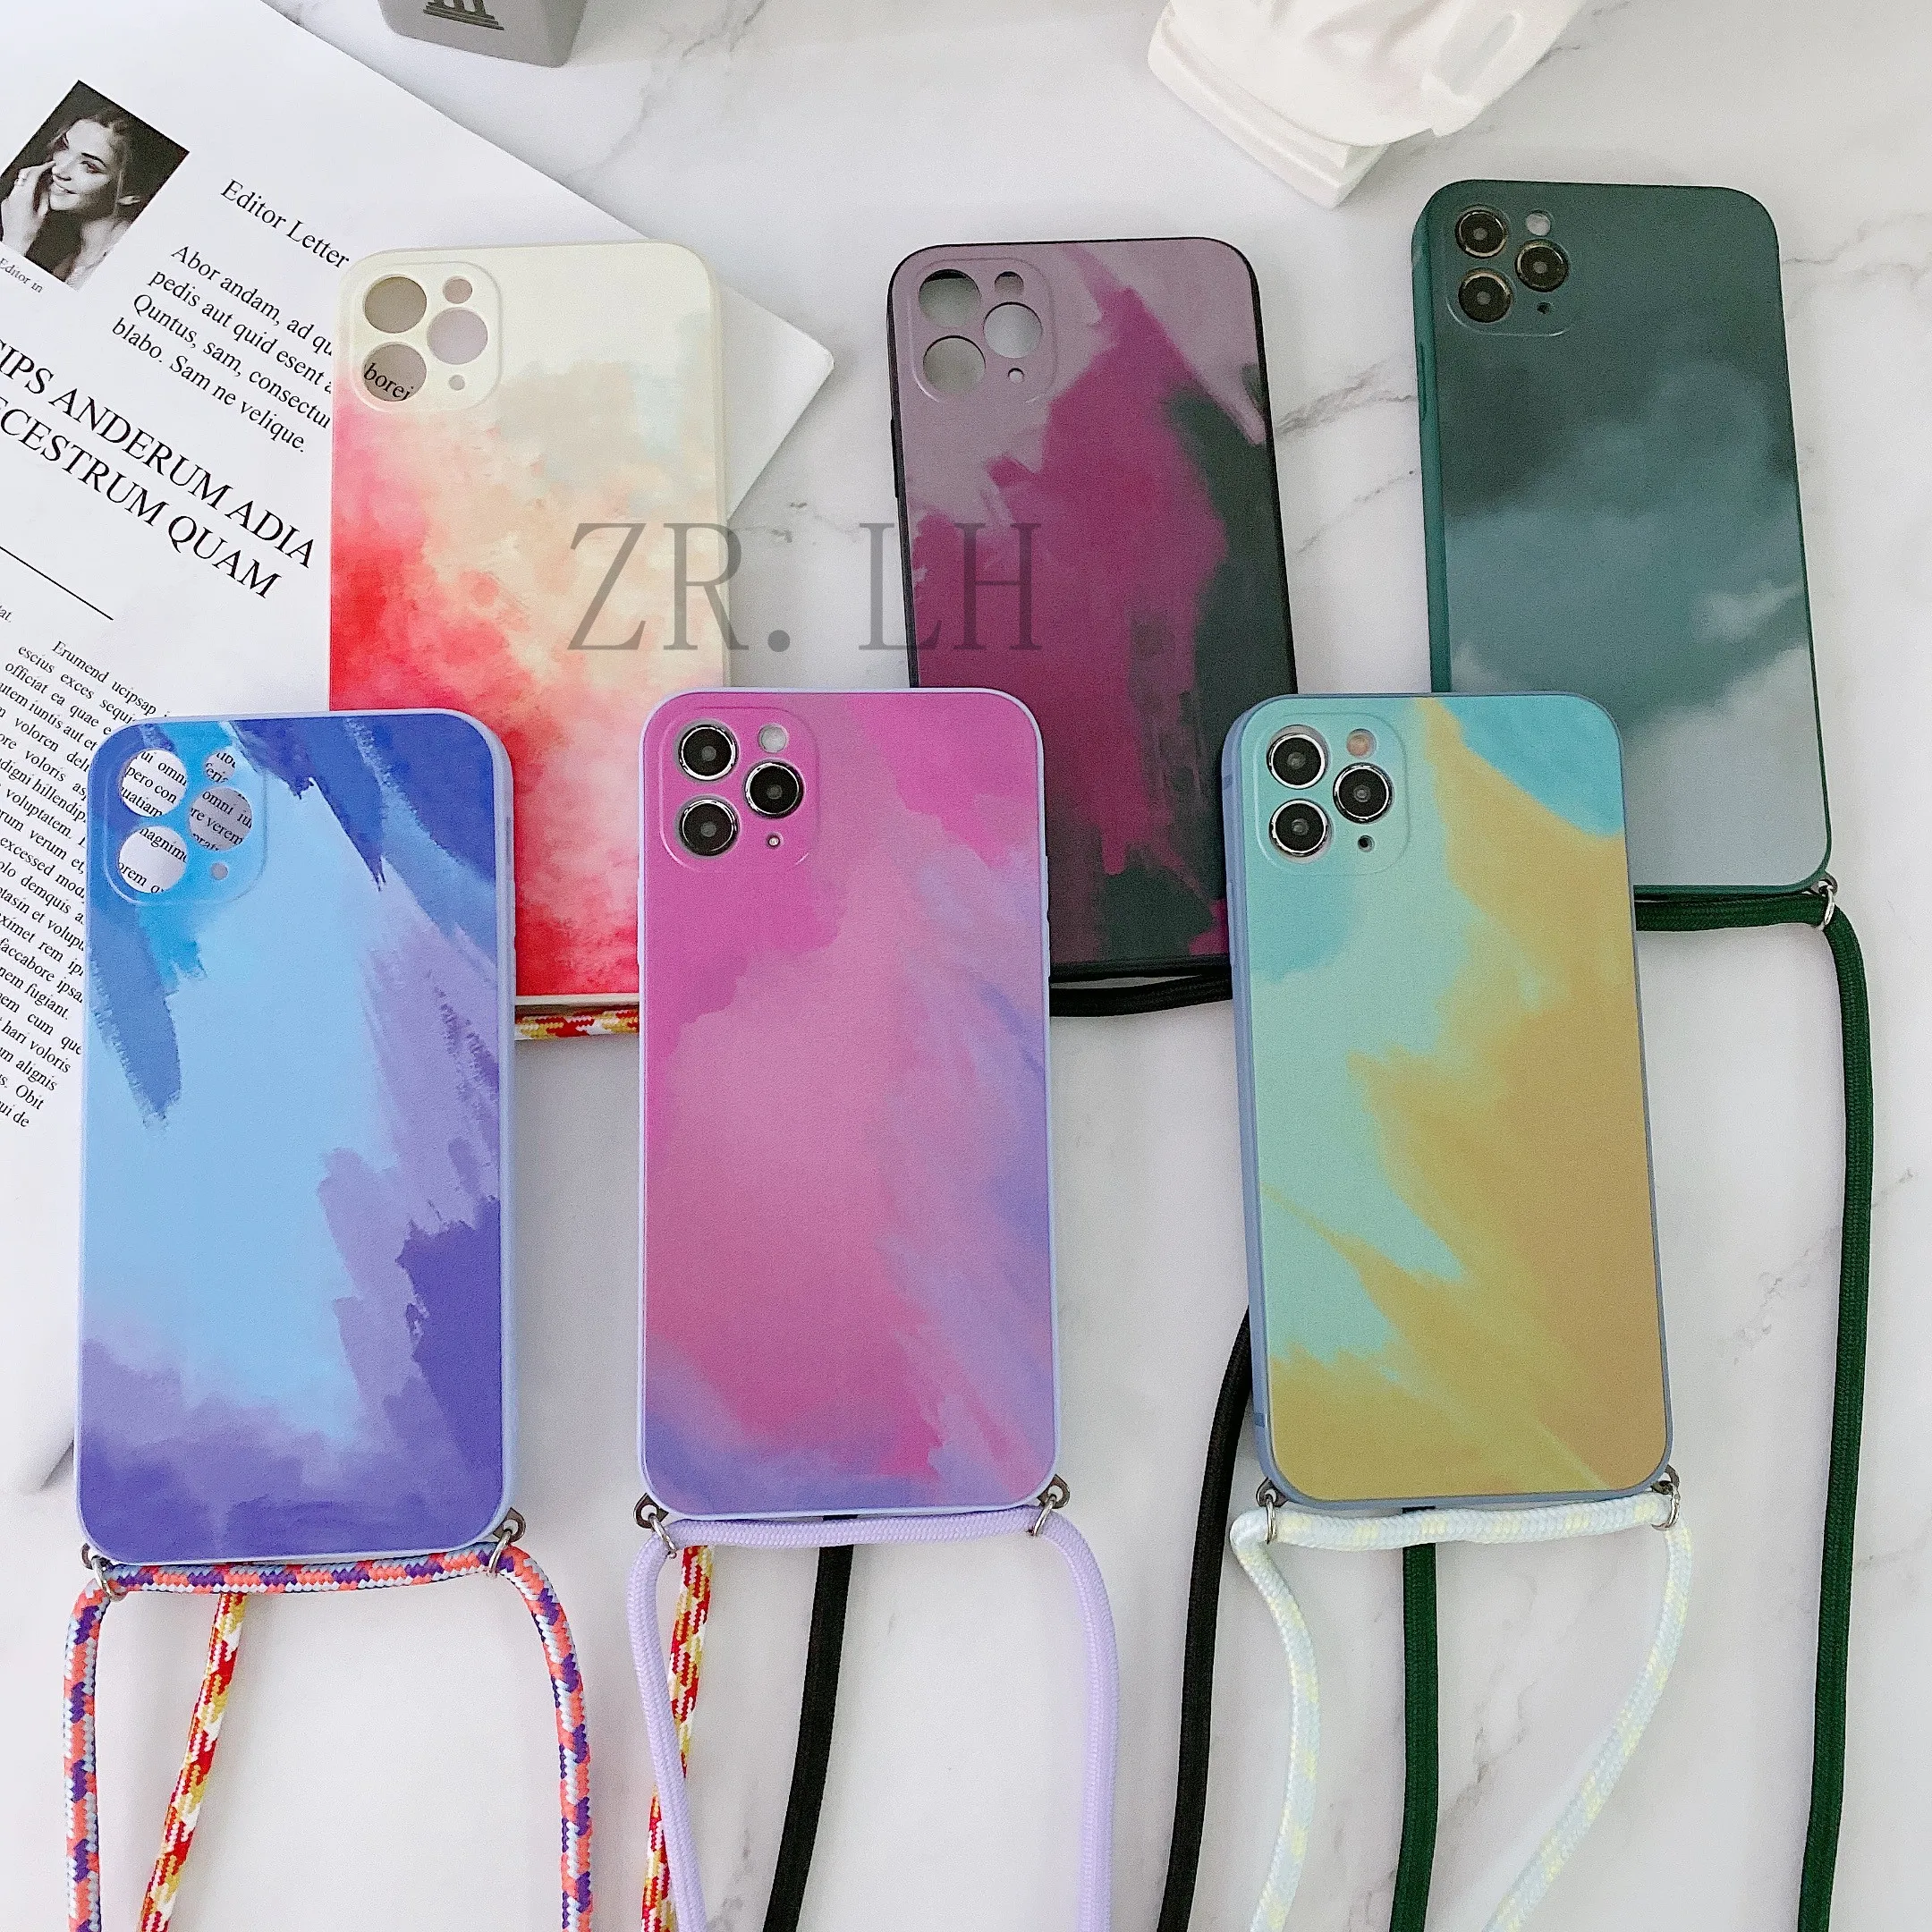 

Watercolor Strap Cord Chain Phone Case For iPhone 12 Pro Max MiNi 11Pro XS Max X XR 7 8 Plus SE 20 Carry Necklace Lanyard Cover